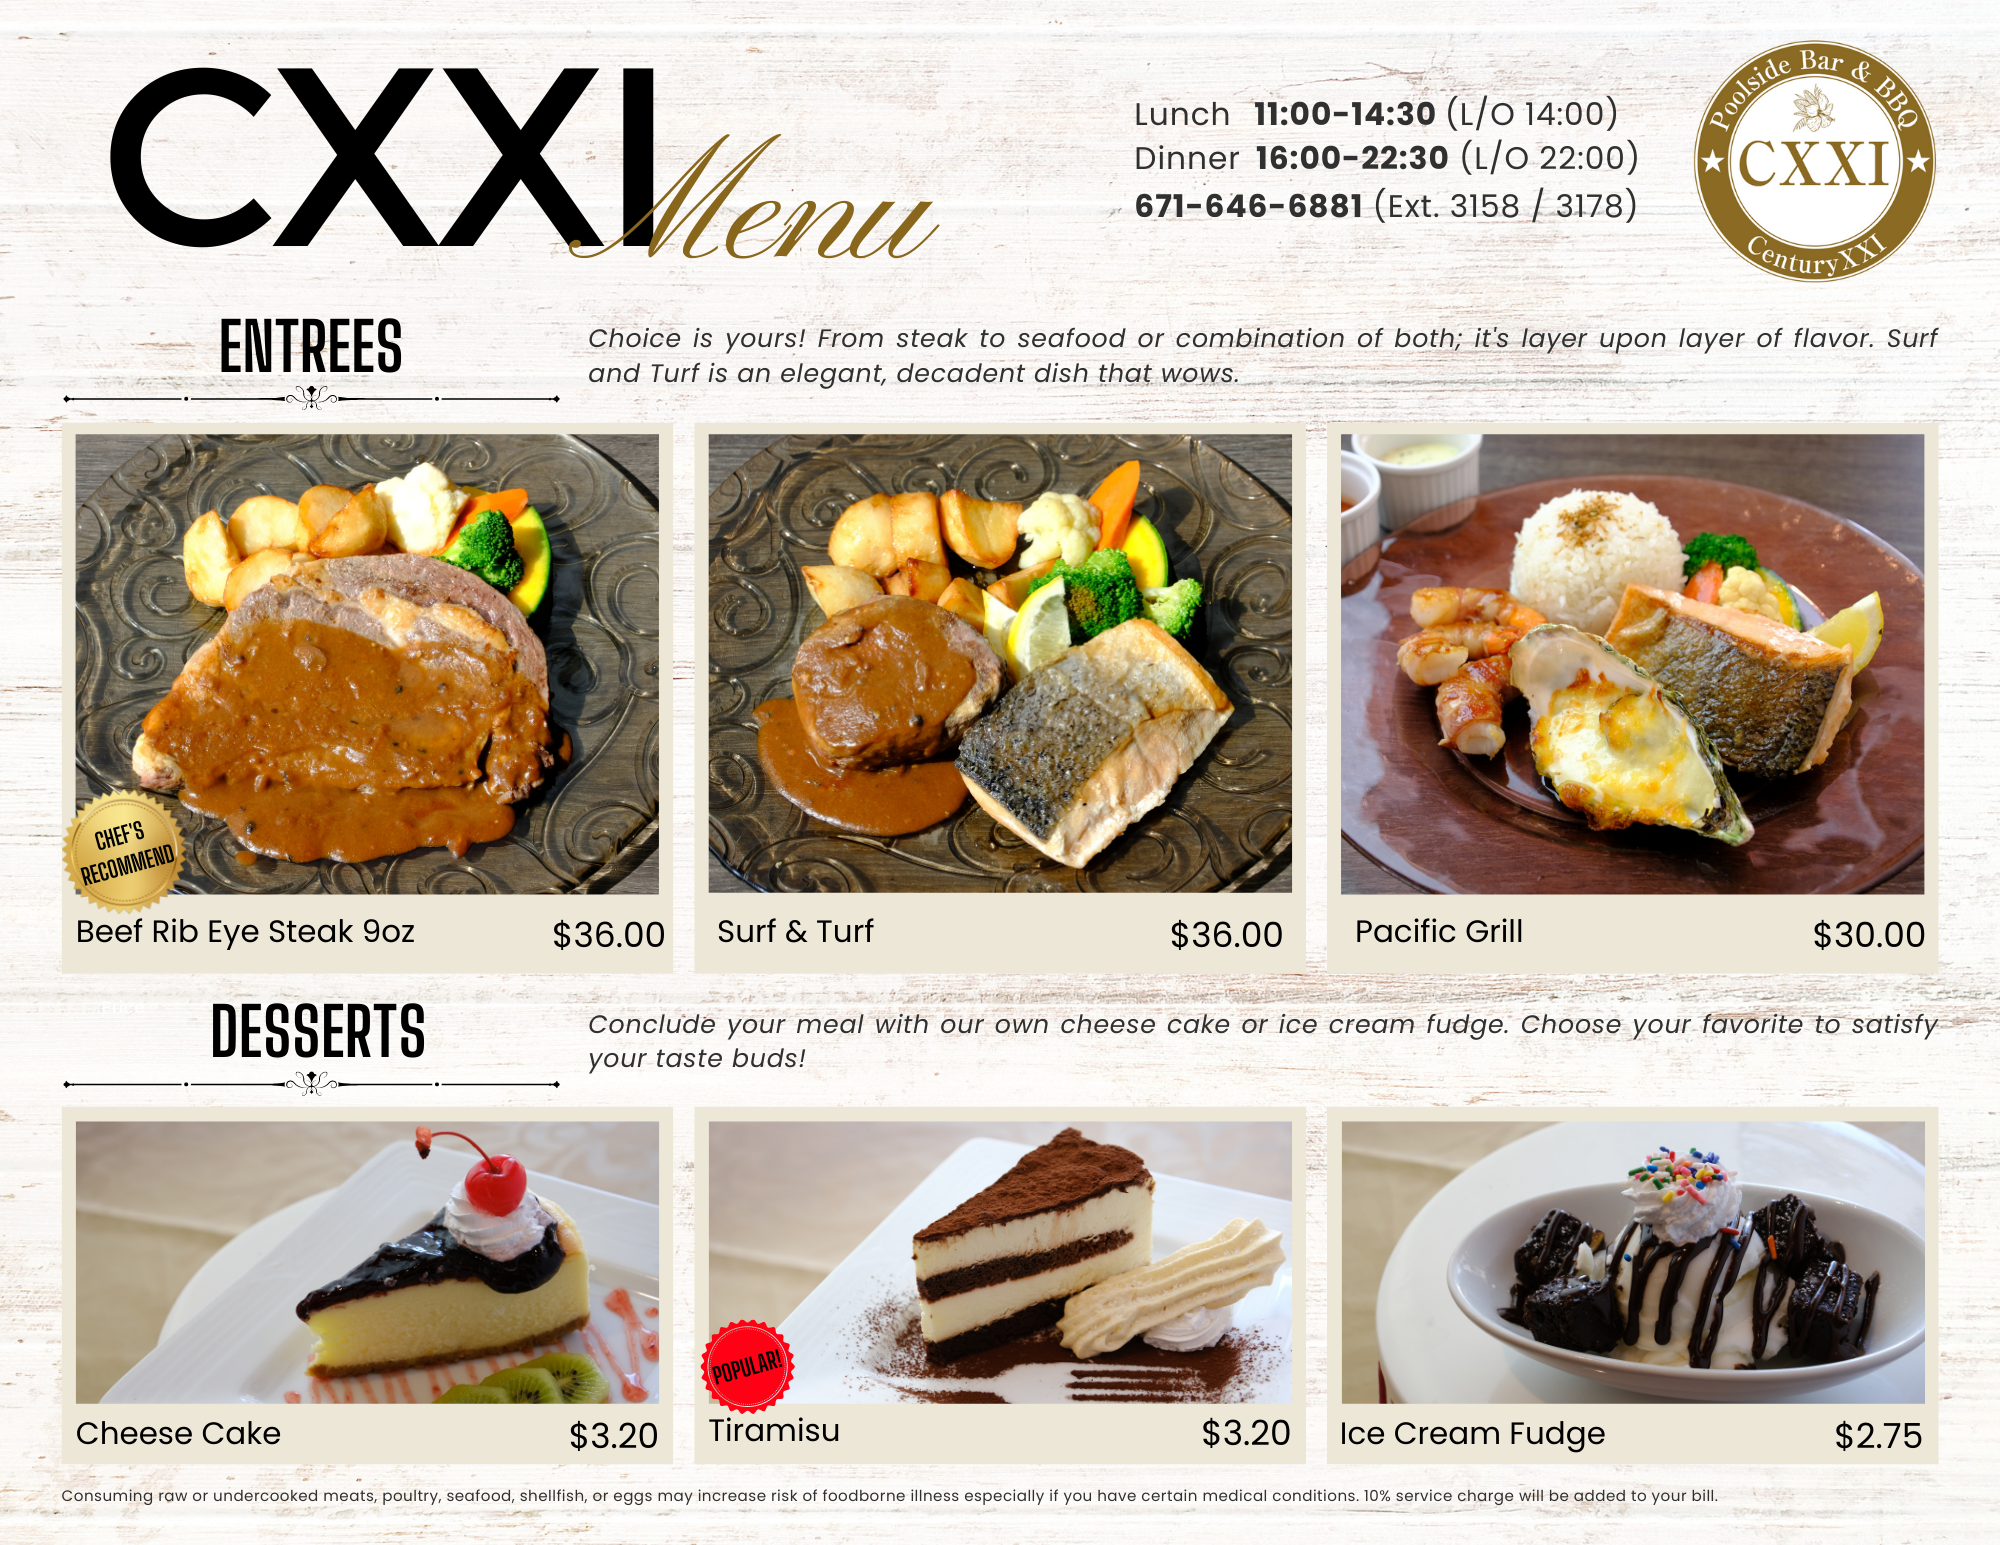 【Century XXI】Now Open for Lunch & Dinner with New Menu!